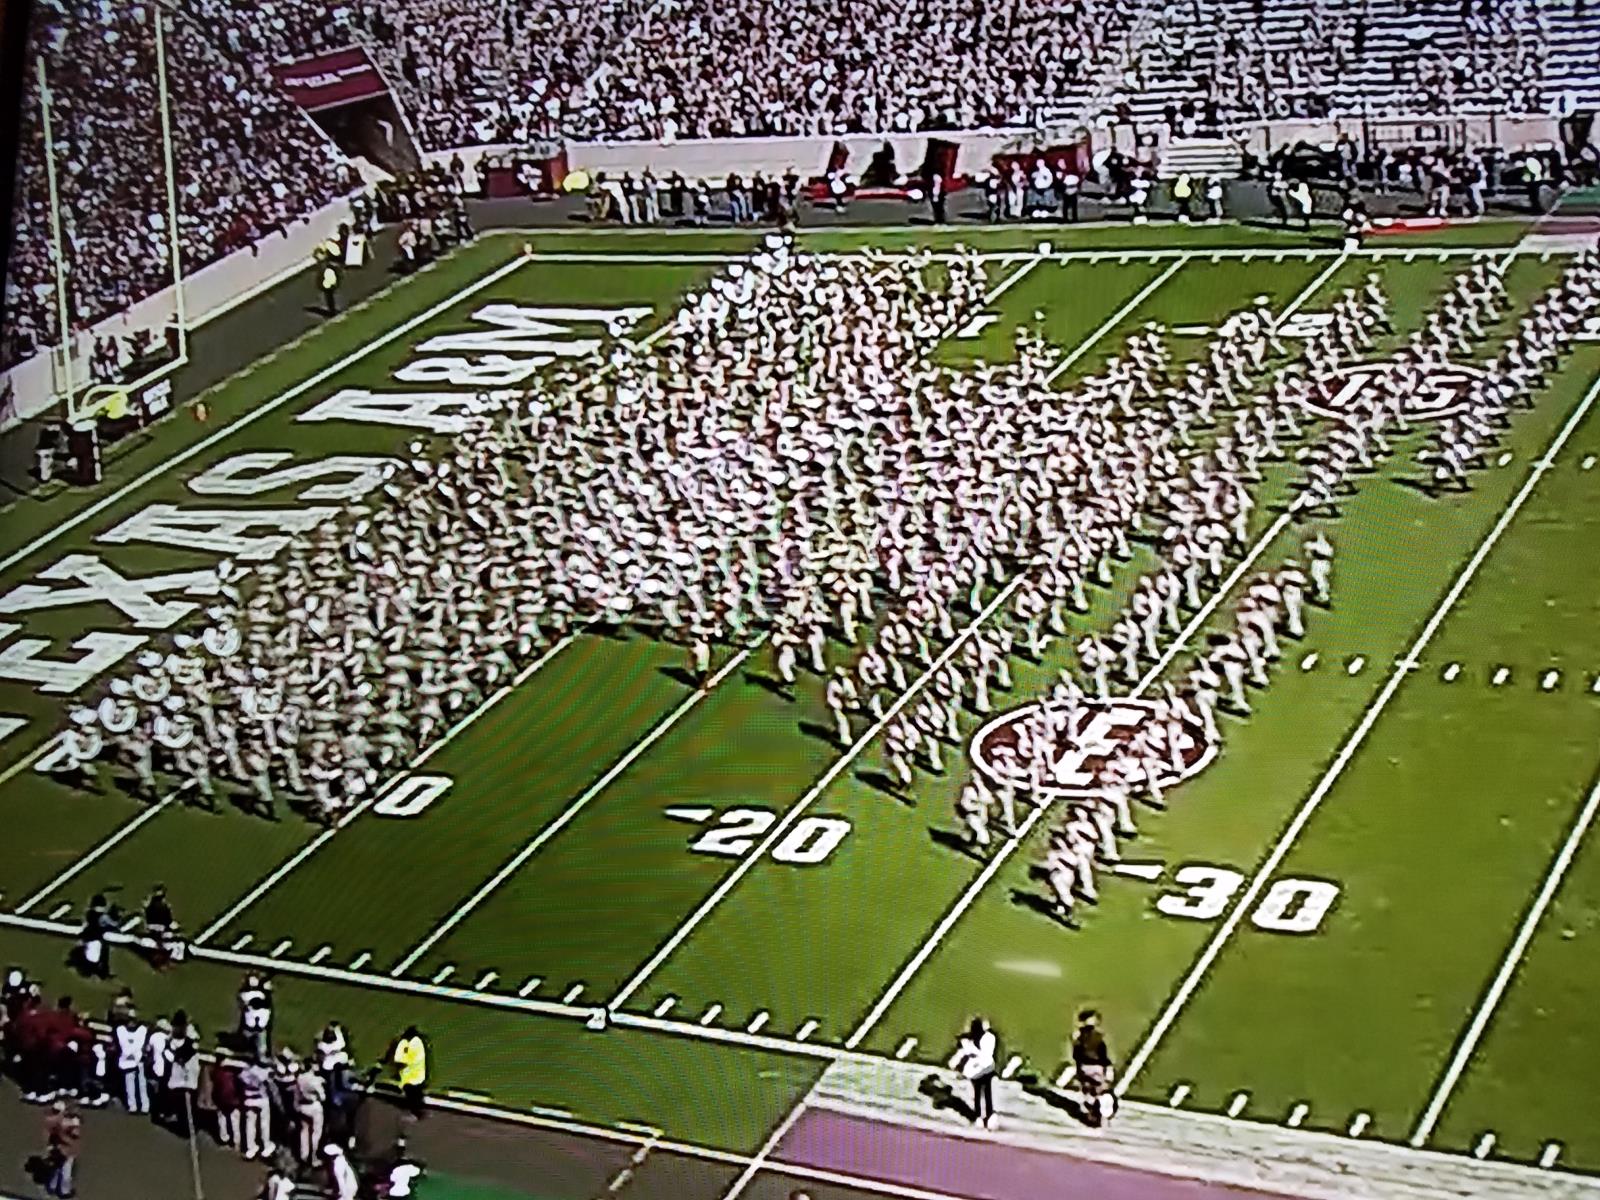 The Fightin' Texas Aggie Band Performing